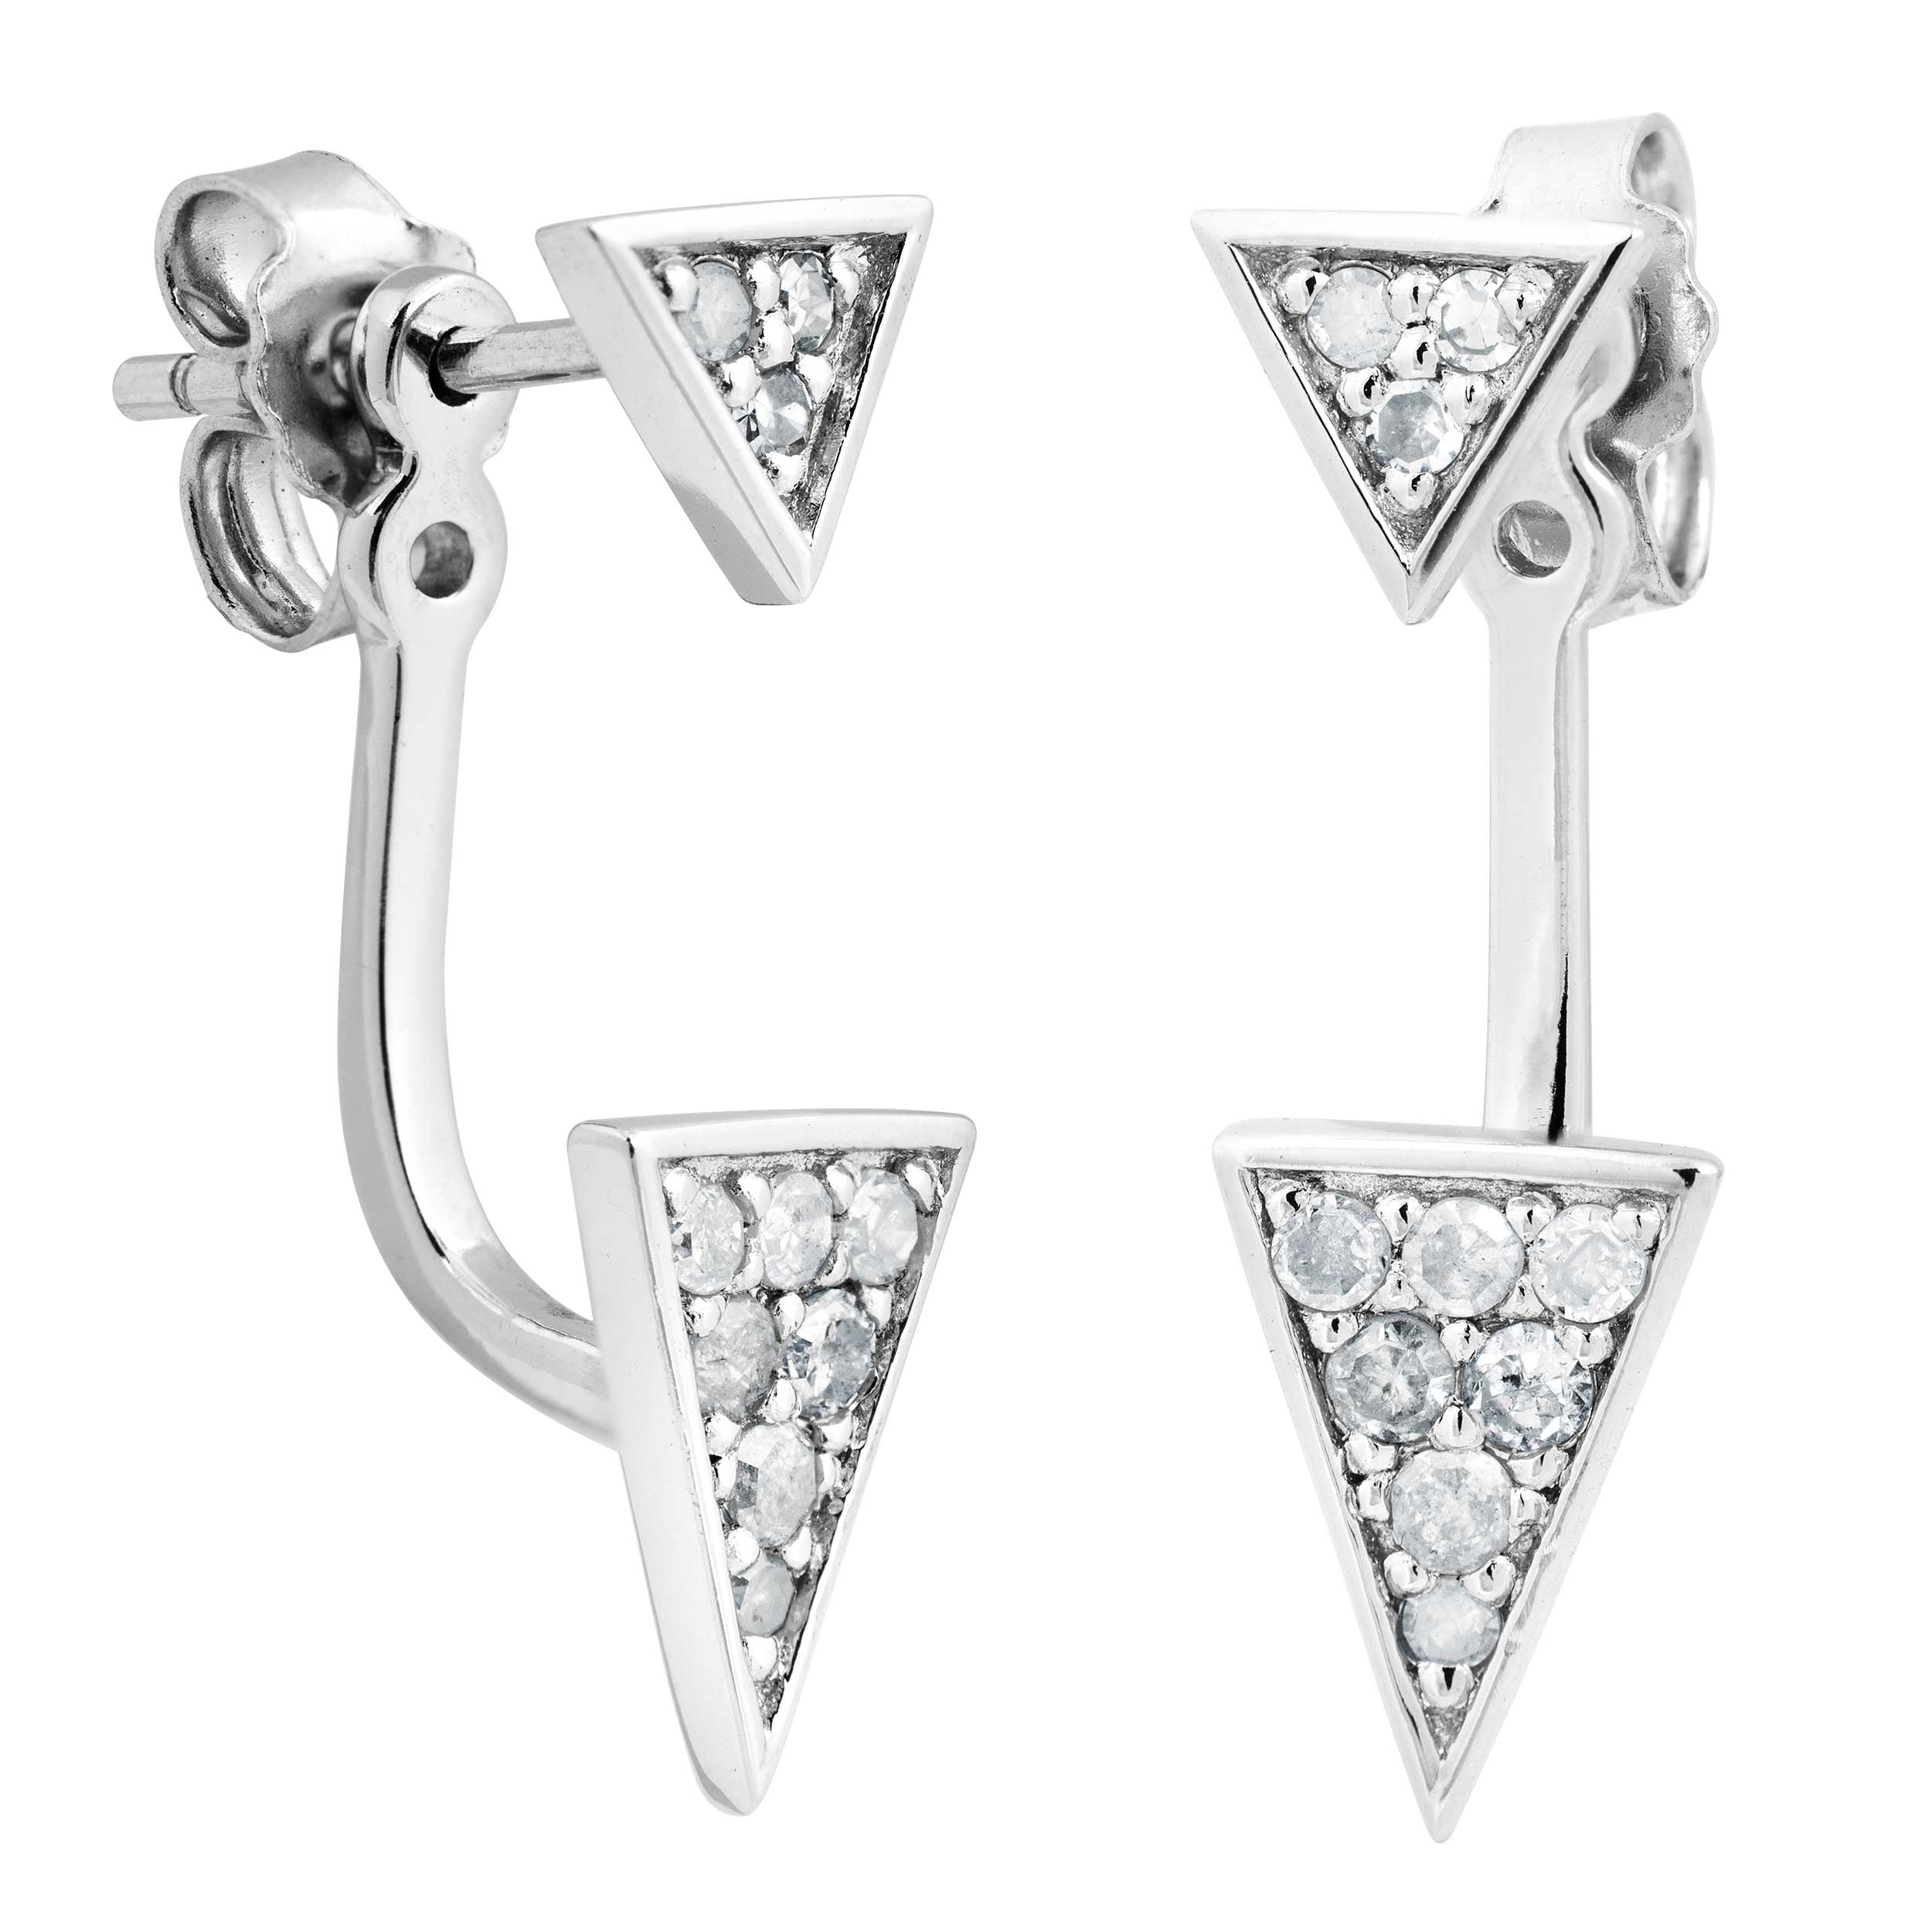 Graduated Diamond with Adjustable Hugging Jackets Earrings, Sterling Silver